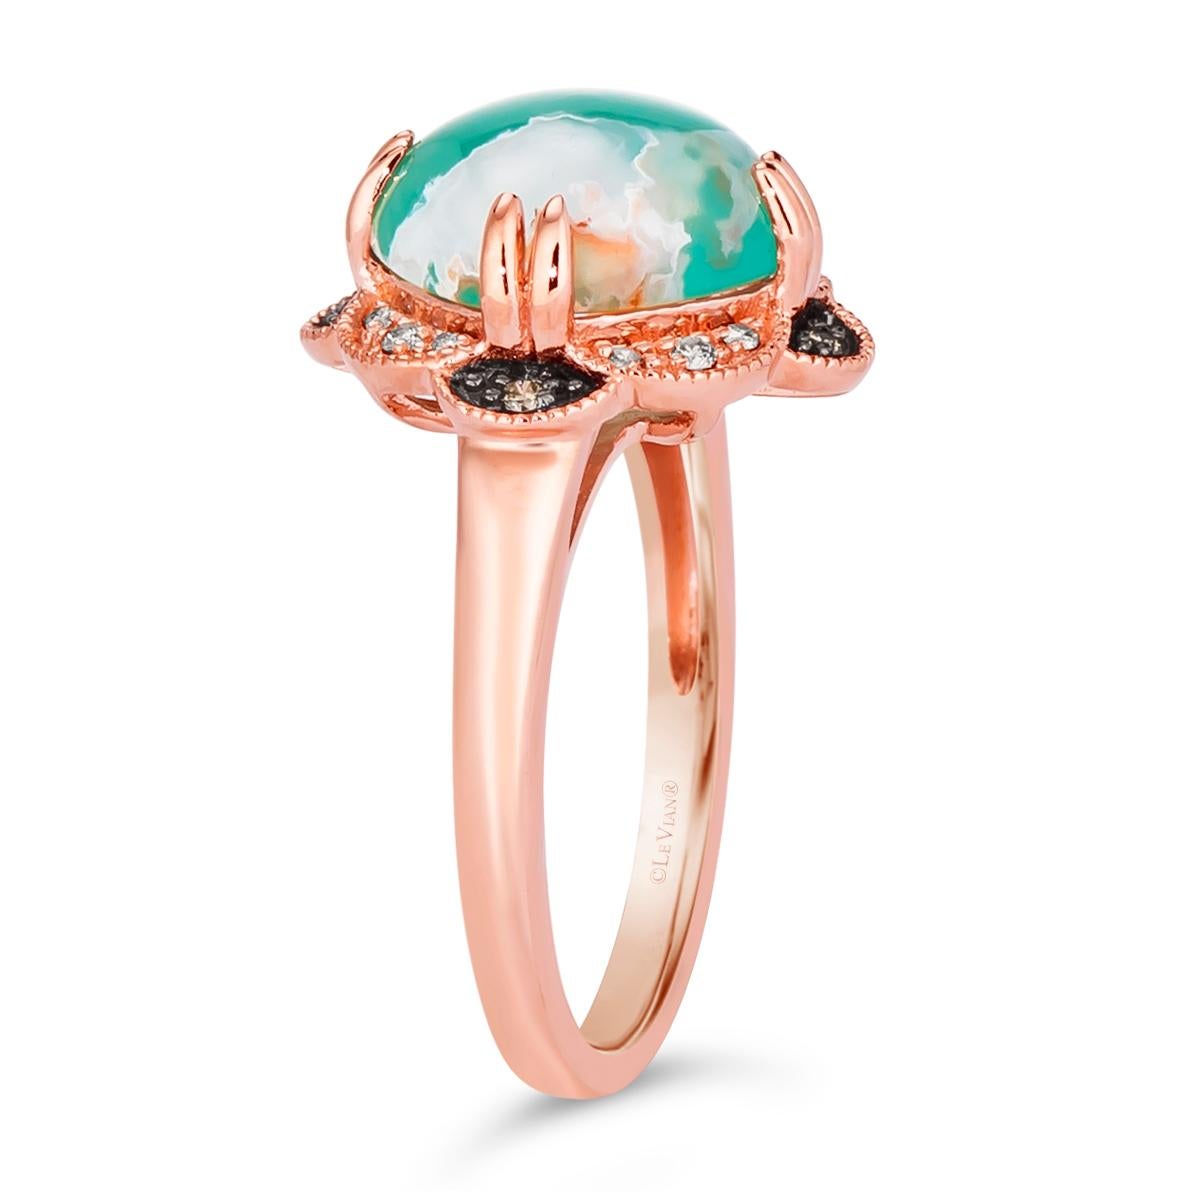 Women's or Men's Levian Rose Gold Plated Silver Natural Aquraprase Topaz Cocktail Ring Size 9 For Sale